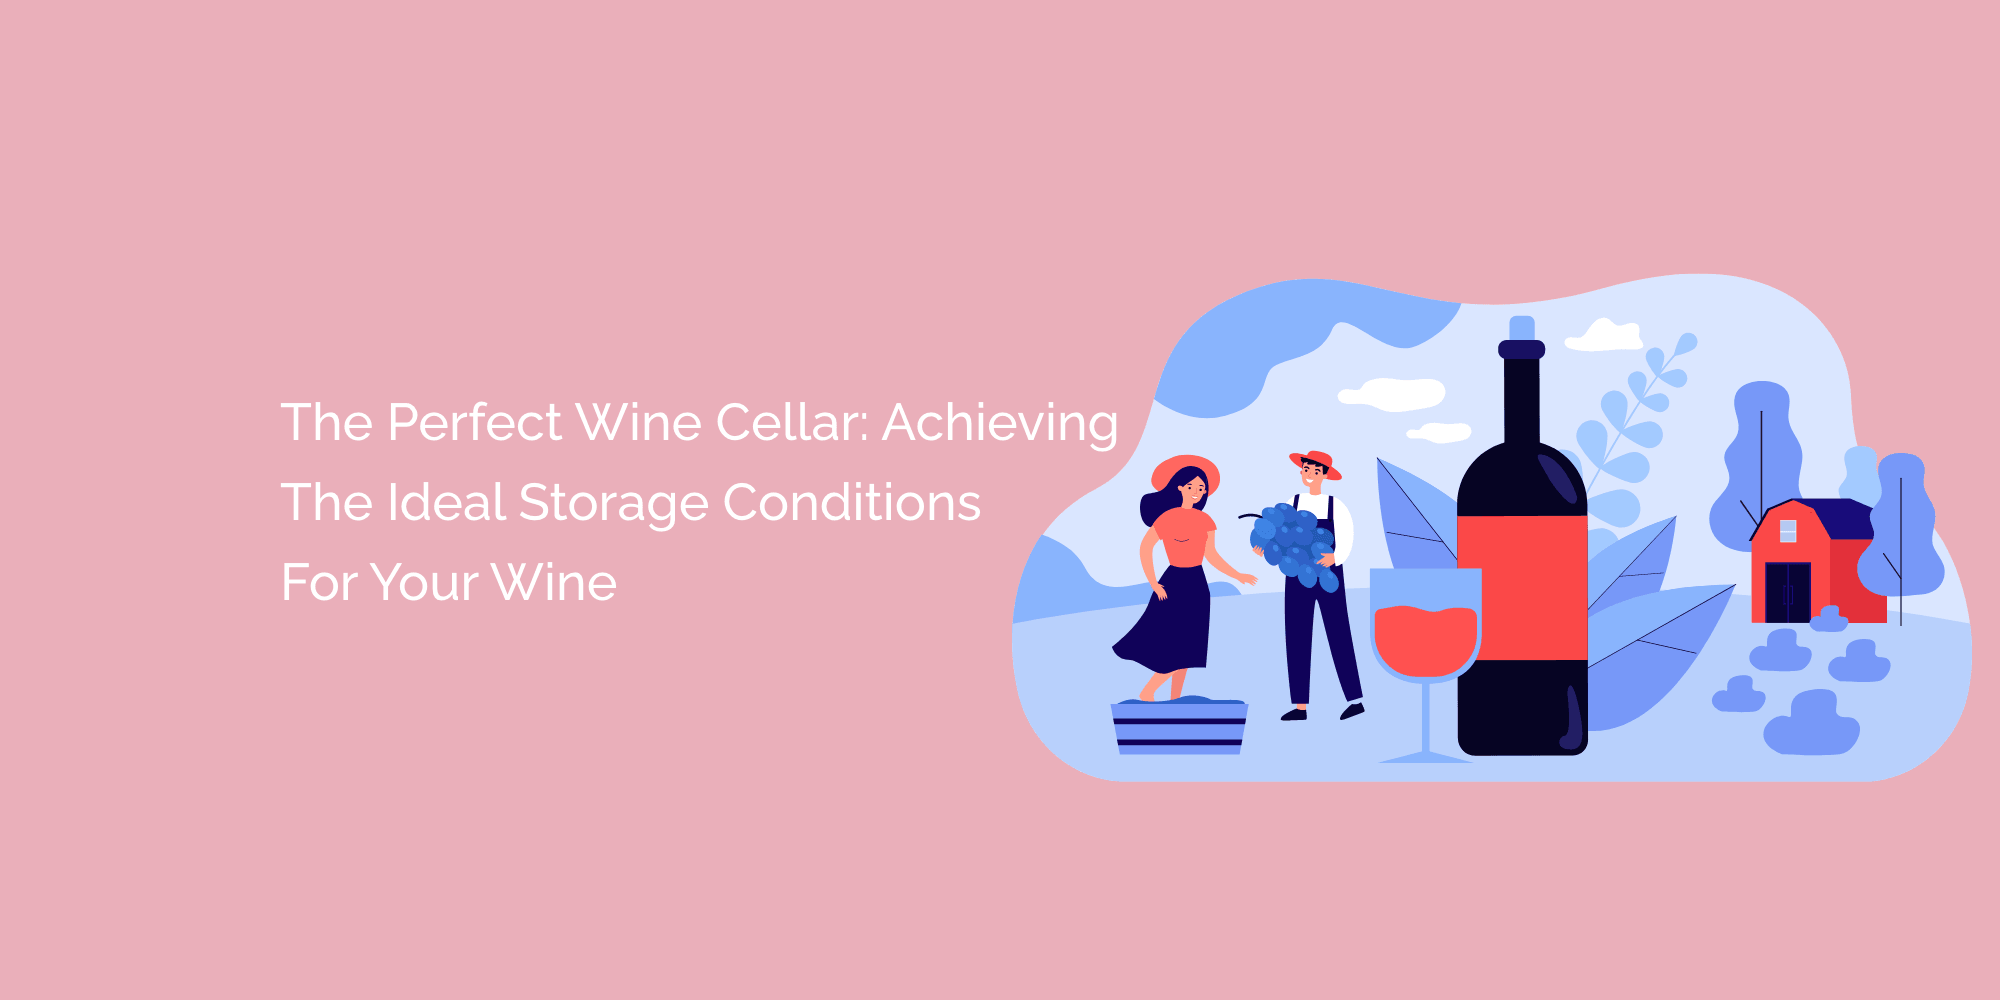 The Perfect Wine Cellar: Achieving the Ideal Storage Conditions for Your Wine